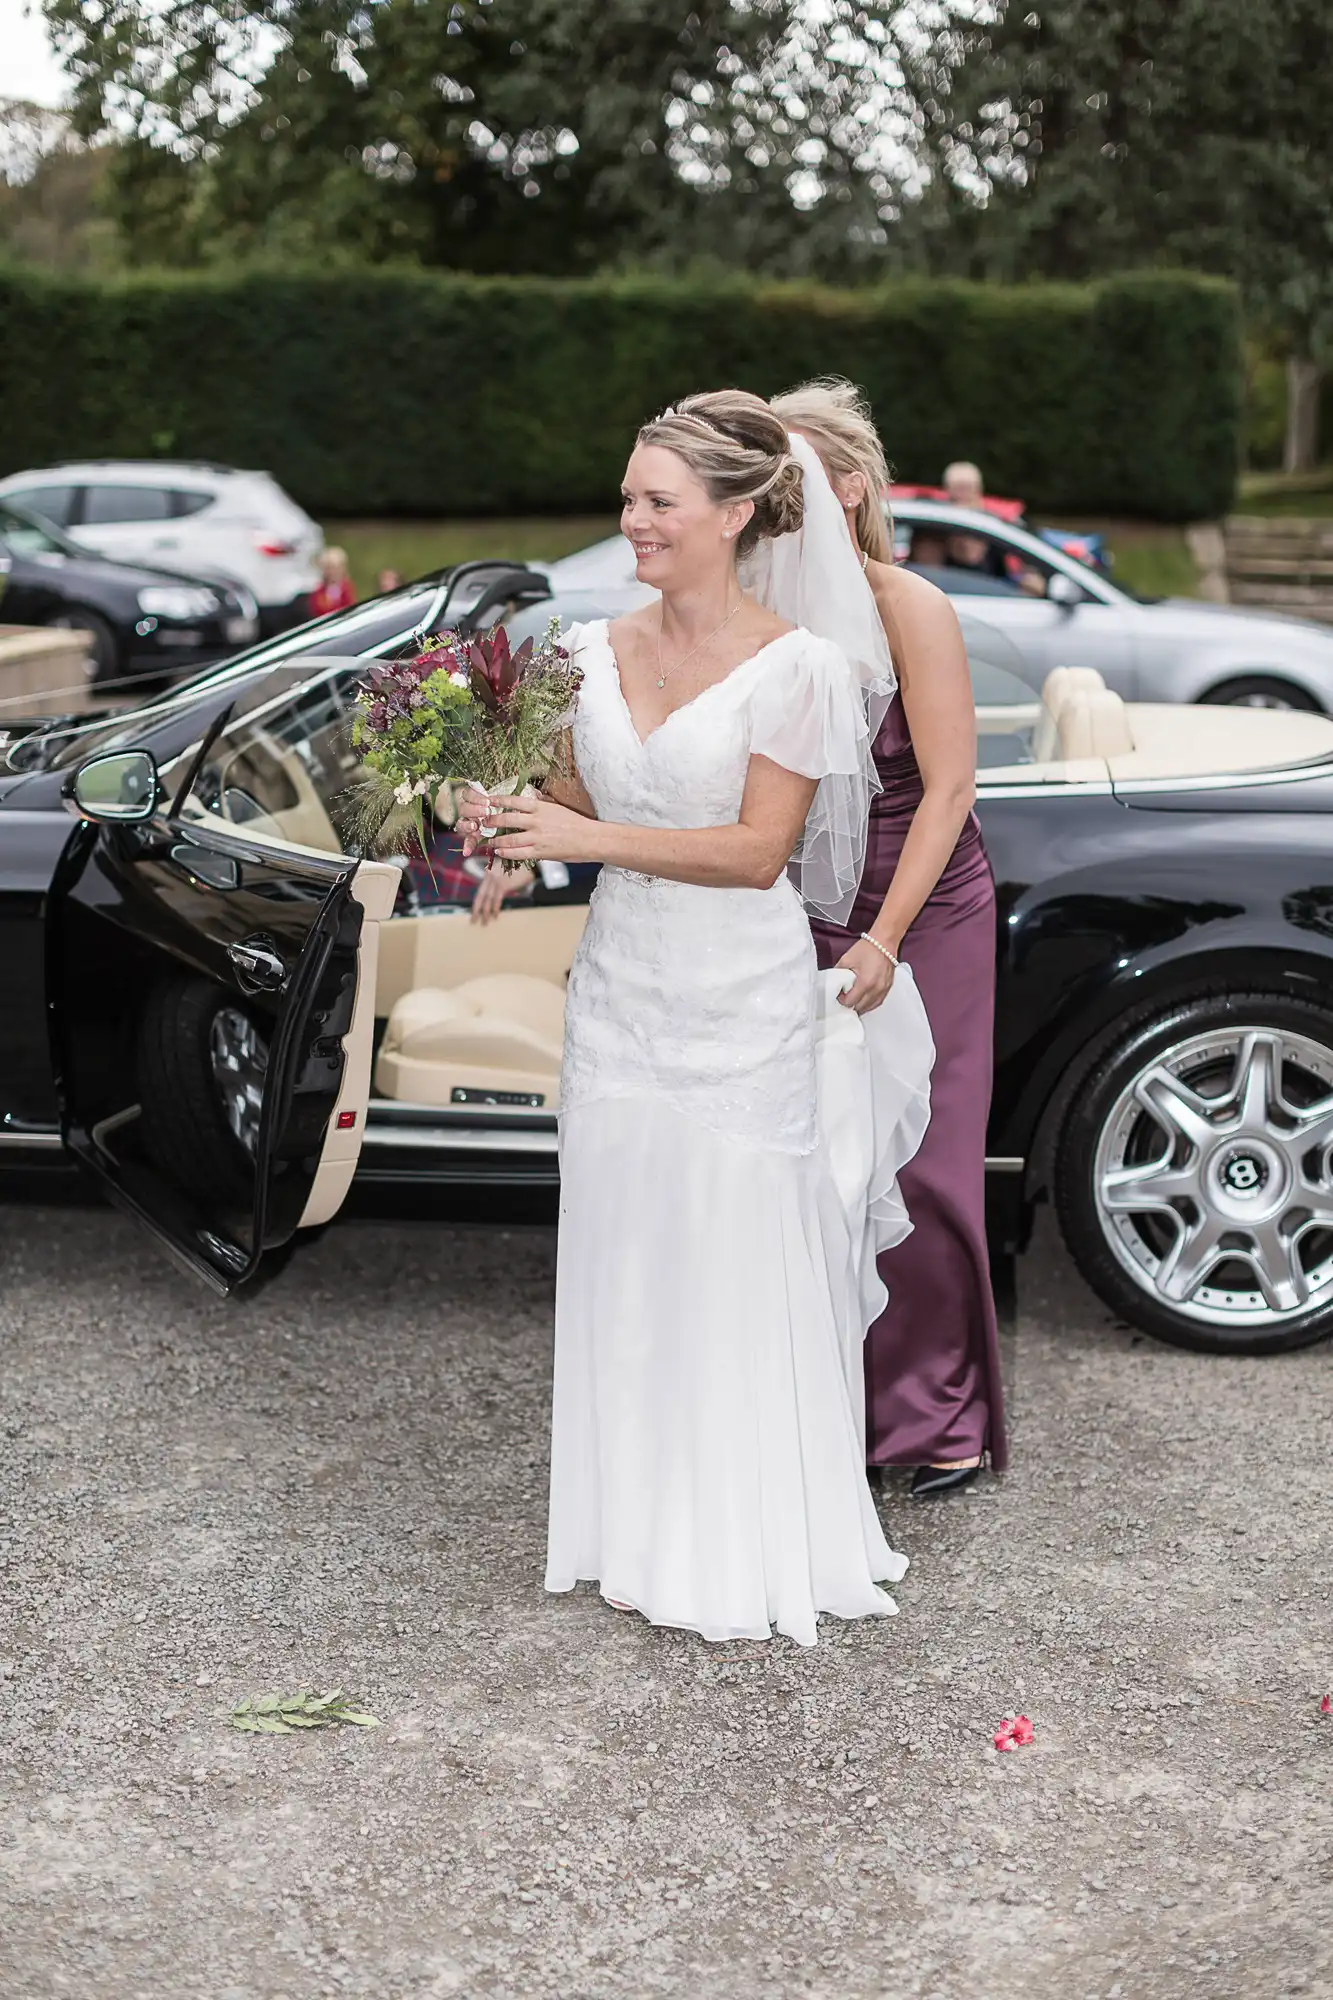 A bride in a white dress holding a bouquet smiles as she stands beside a luxury car, assisted by a bridesmaid in purple.